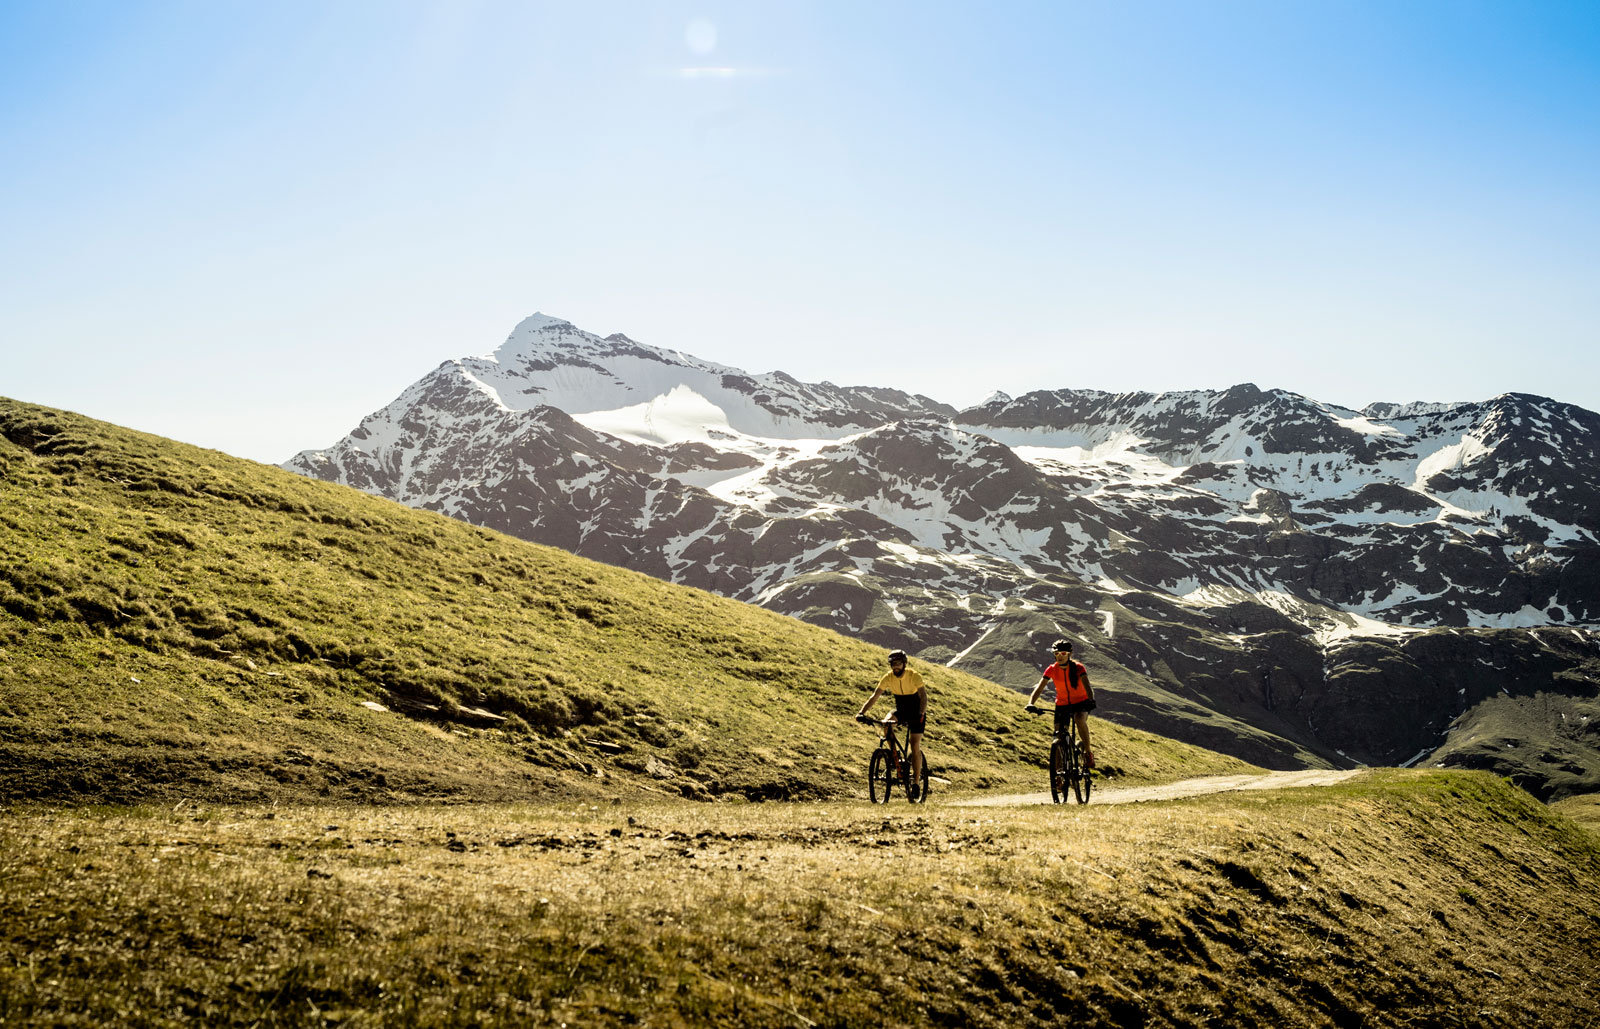 Cyclists on a mountain path with snowy peaks in the background